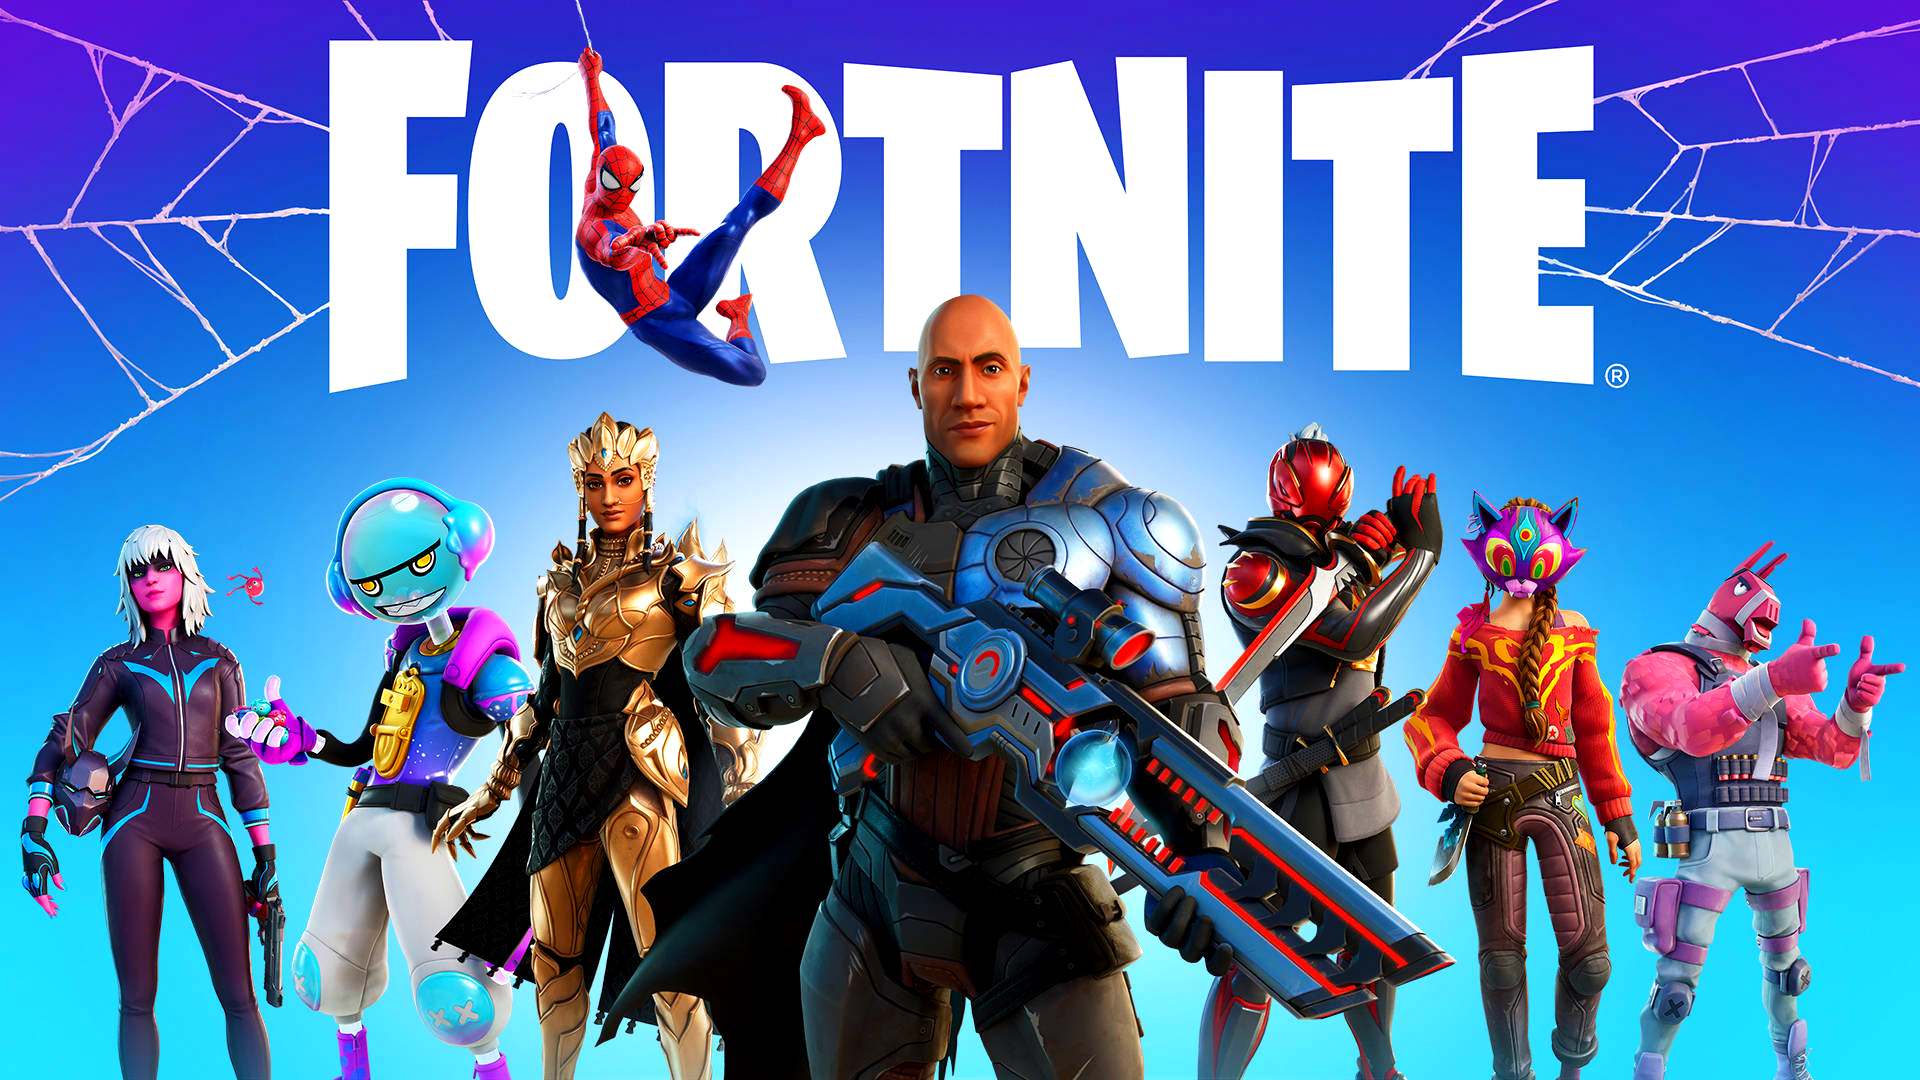 Fortnite is arguably one of the most prominent Battle Royale games 